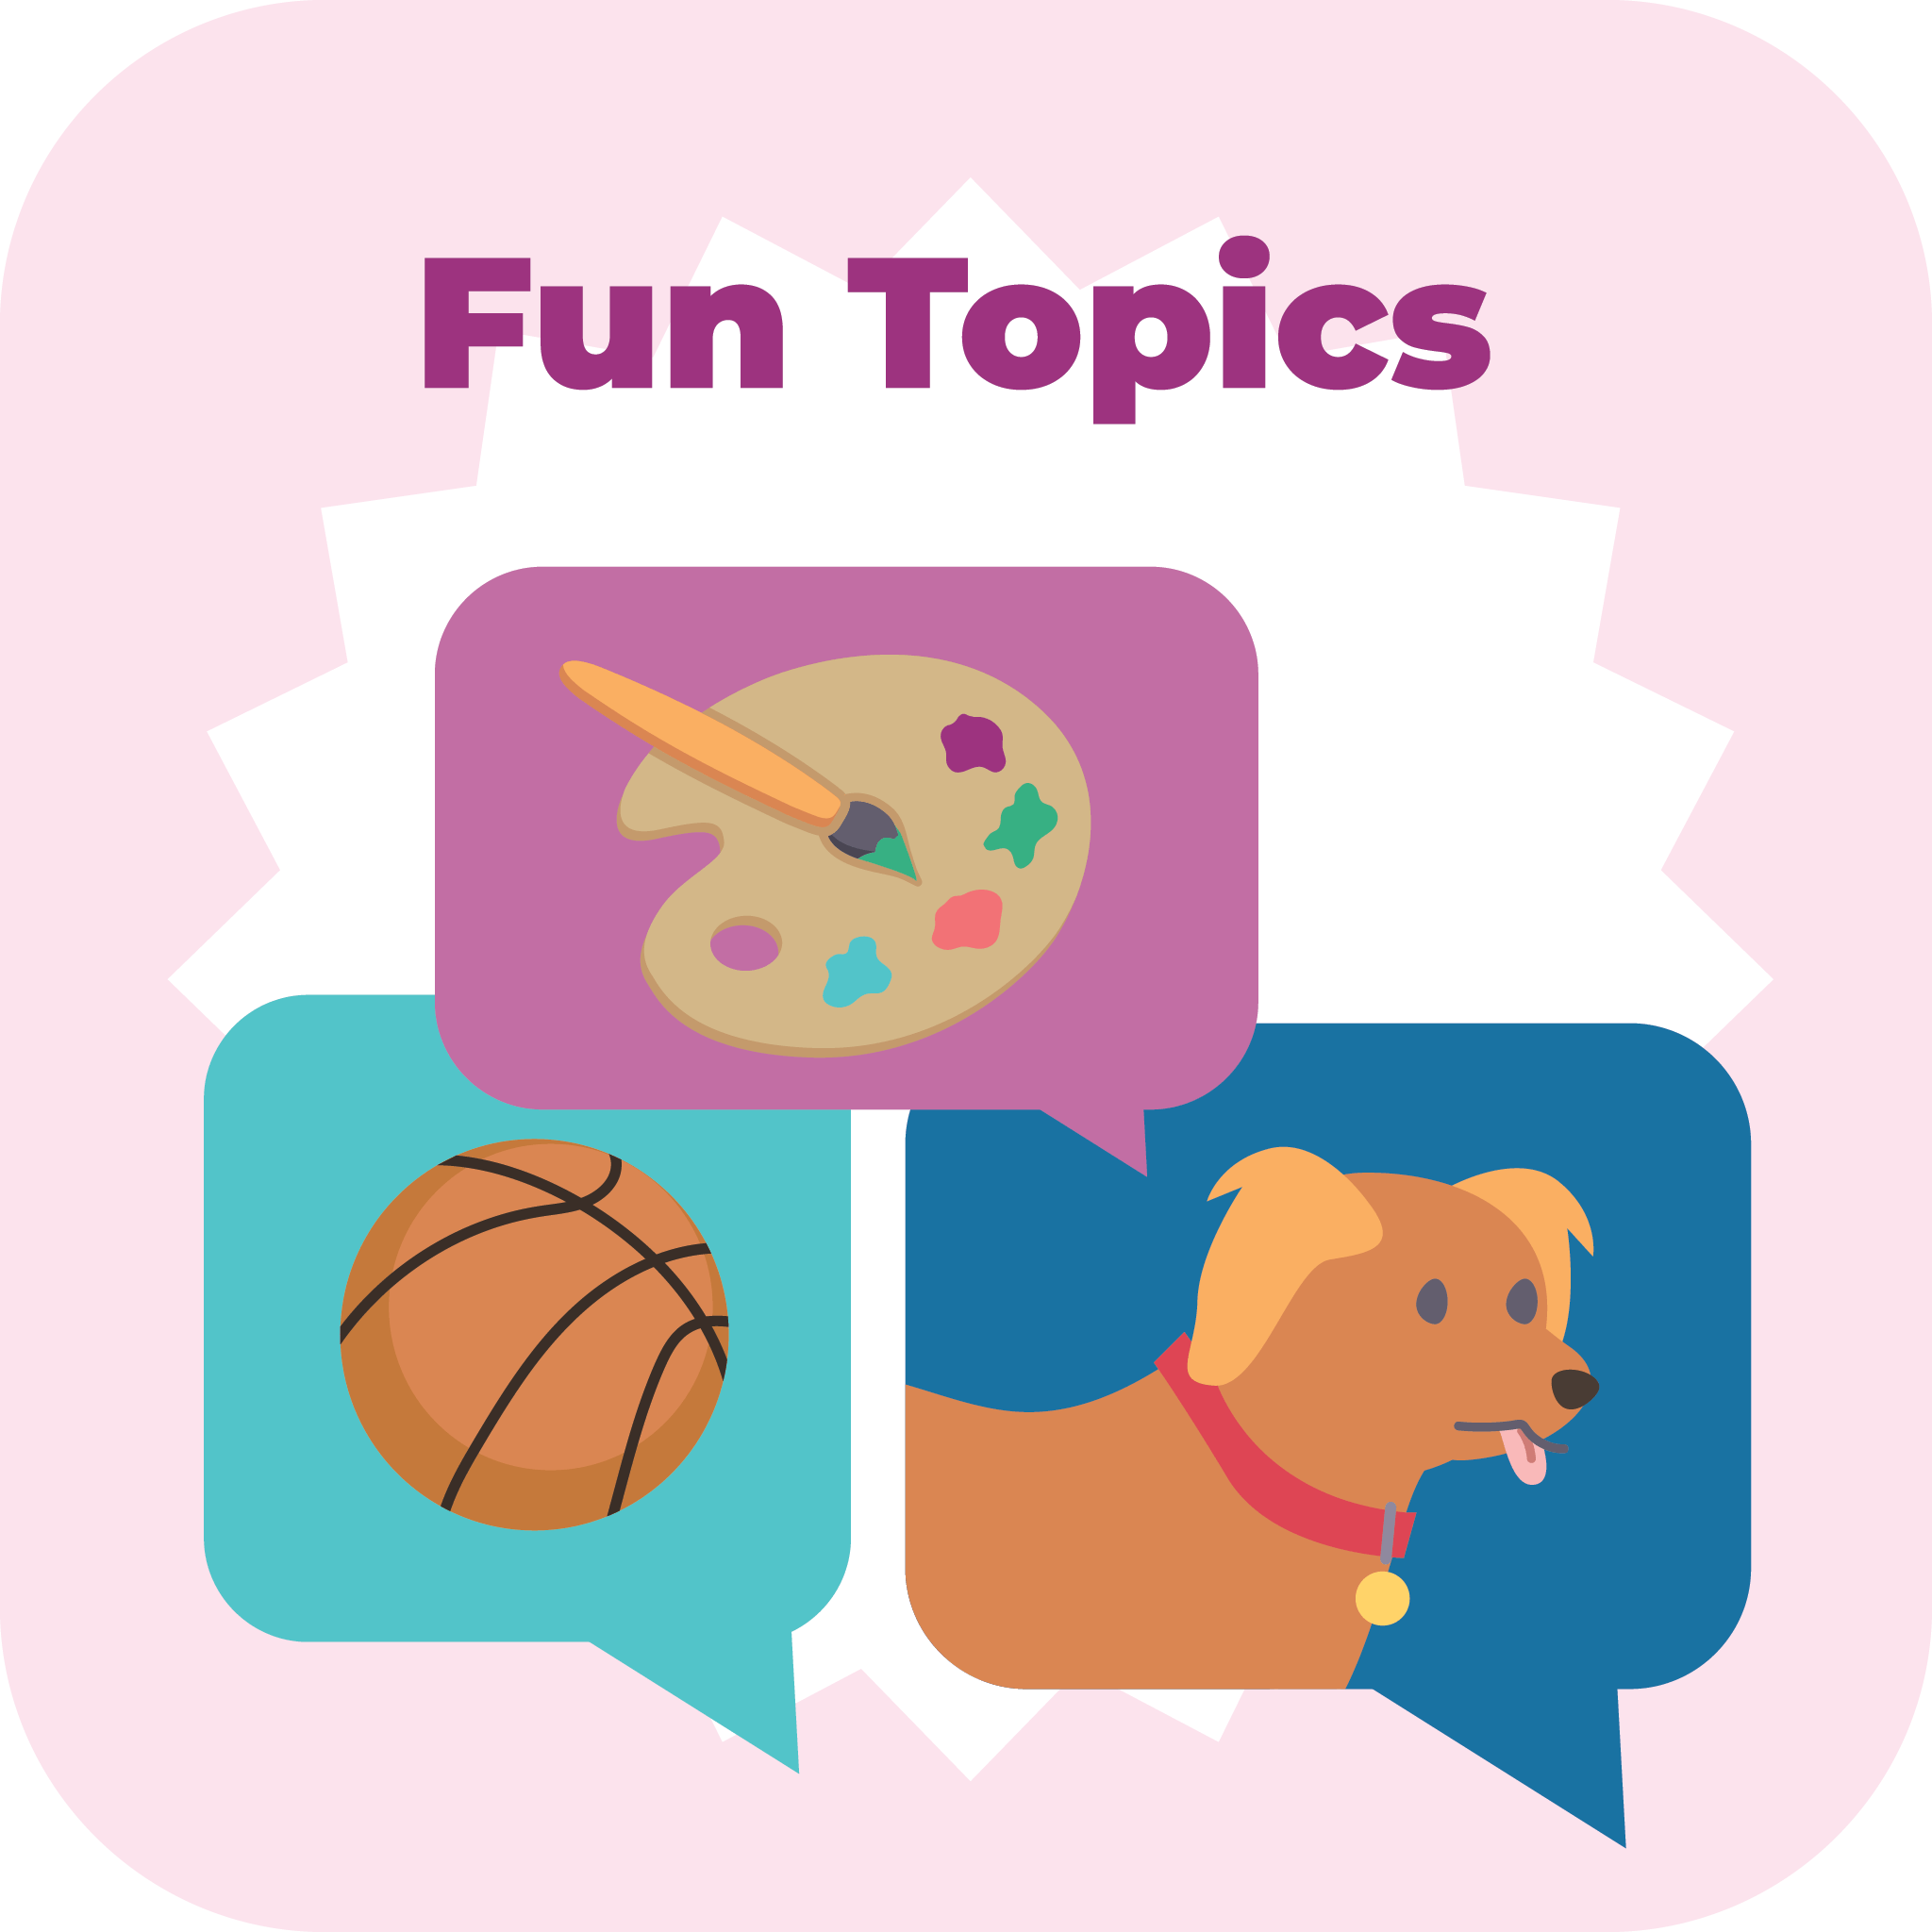 Fun topics with a dog and ball.